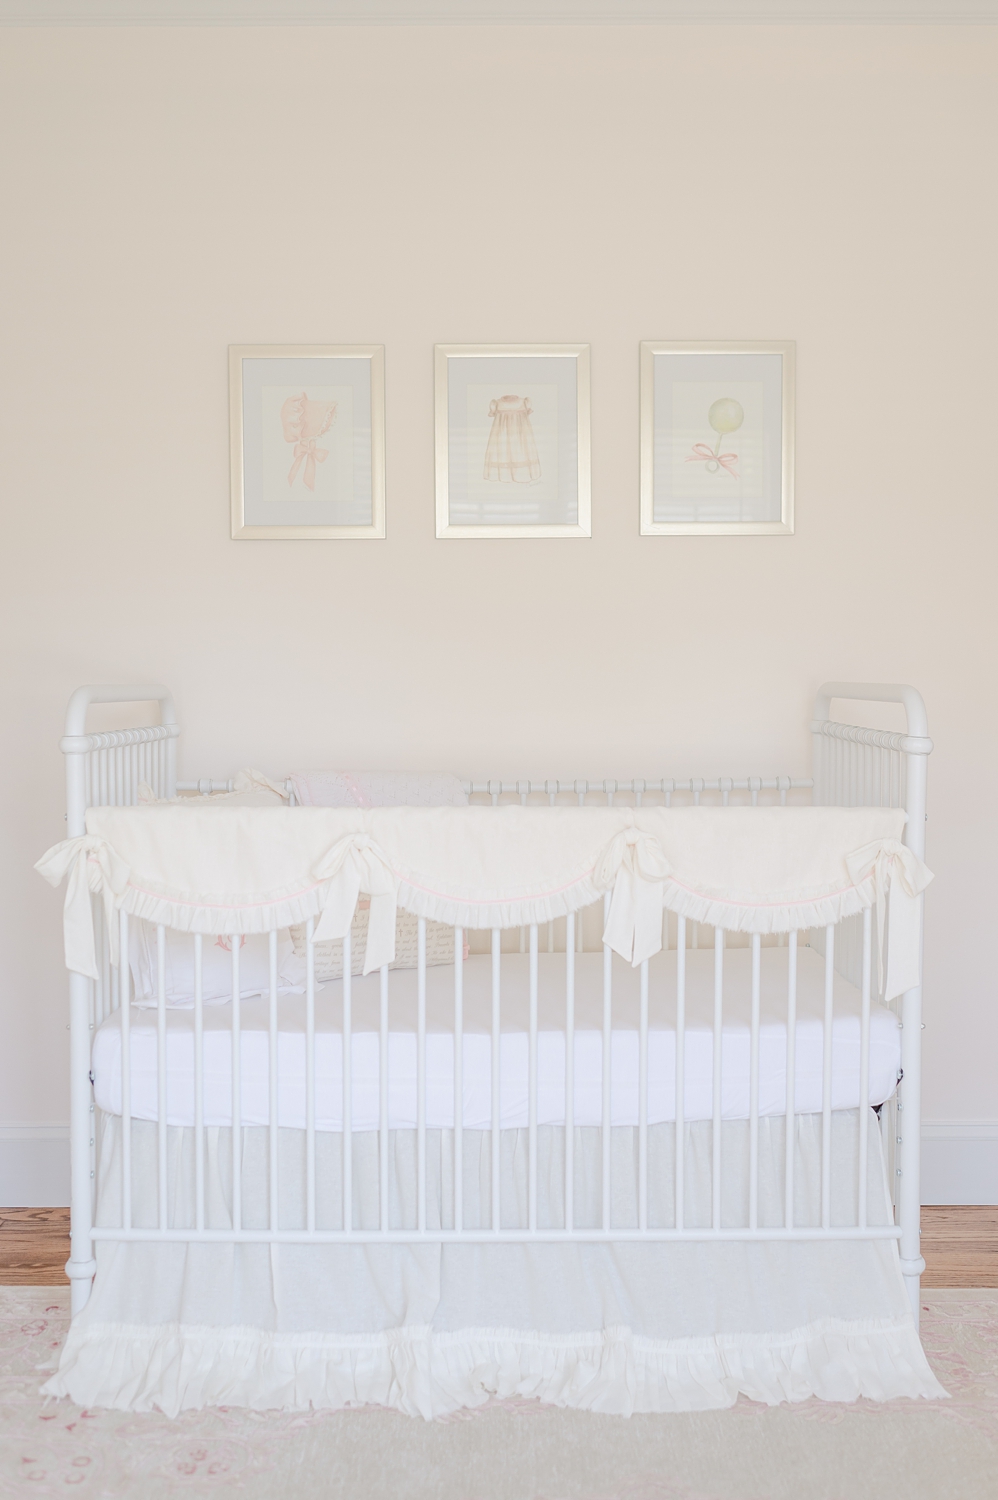 white crib with lace bedding against white wall with framed prints above